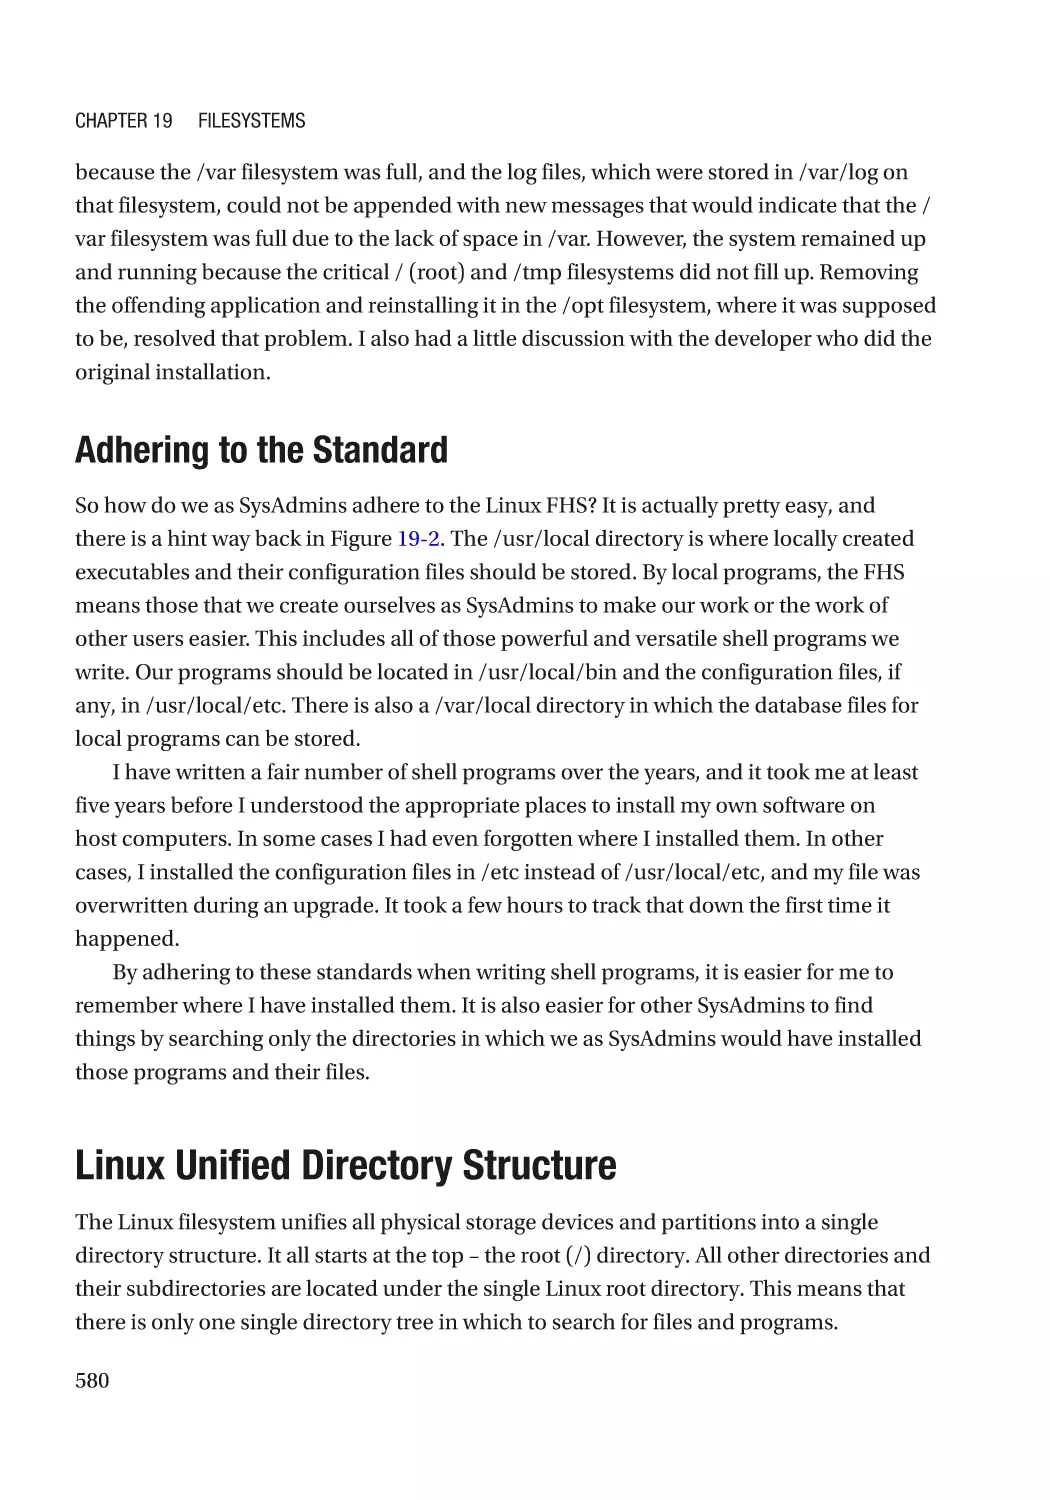 Adhering to the Standard
Linux Unified Directory Structure